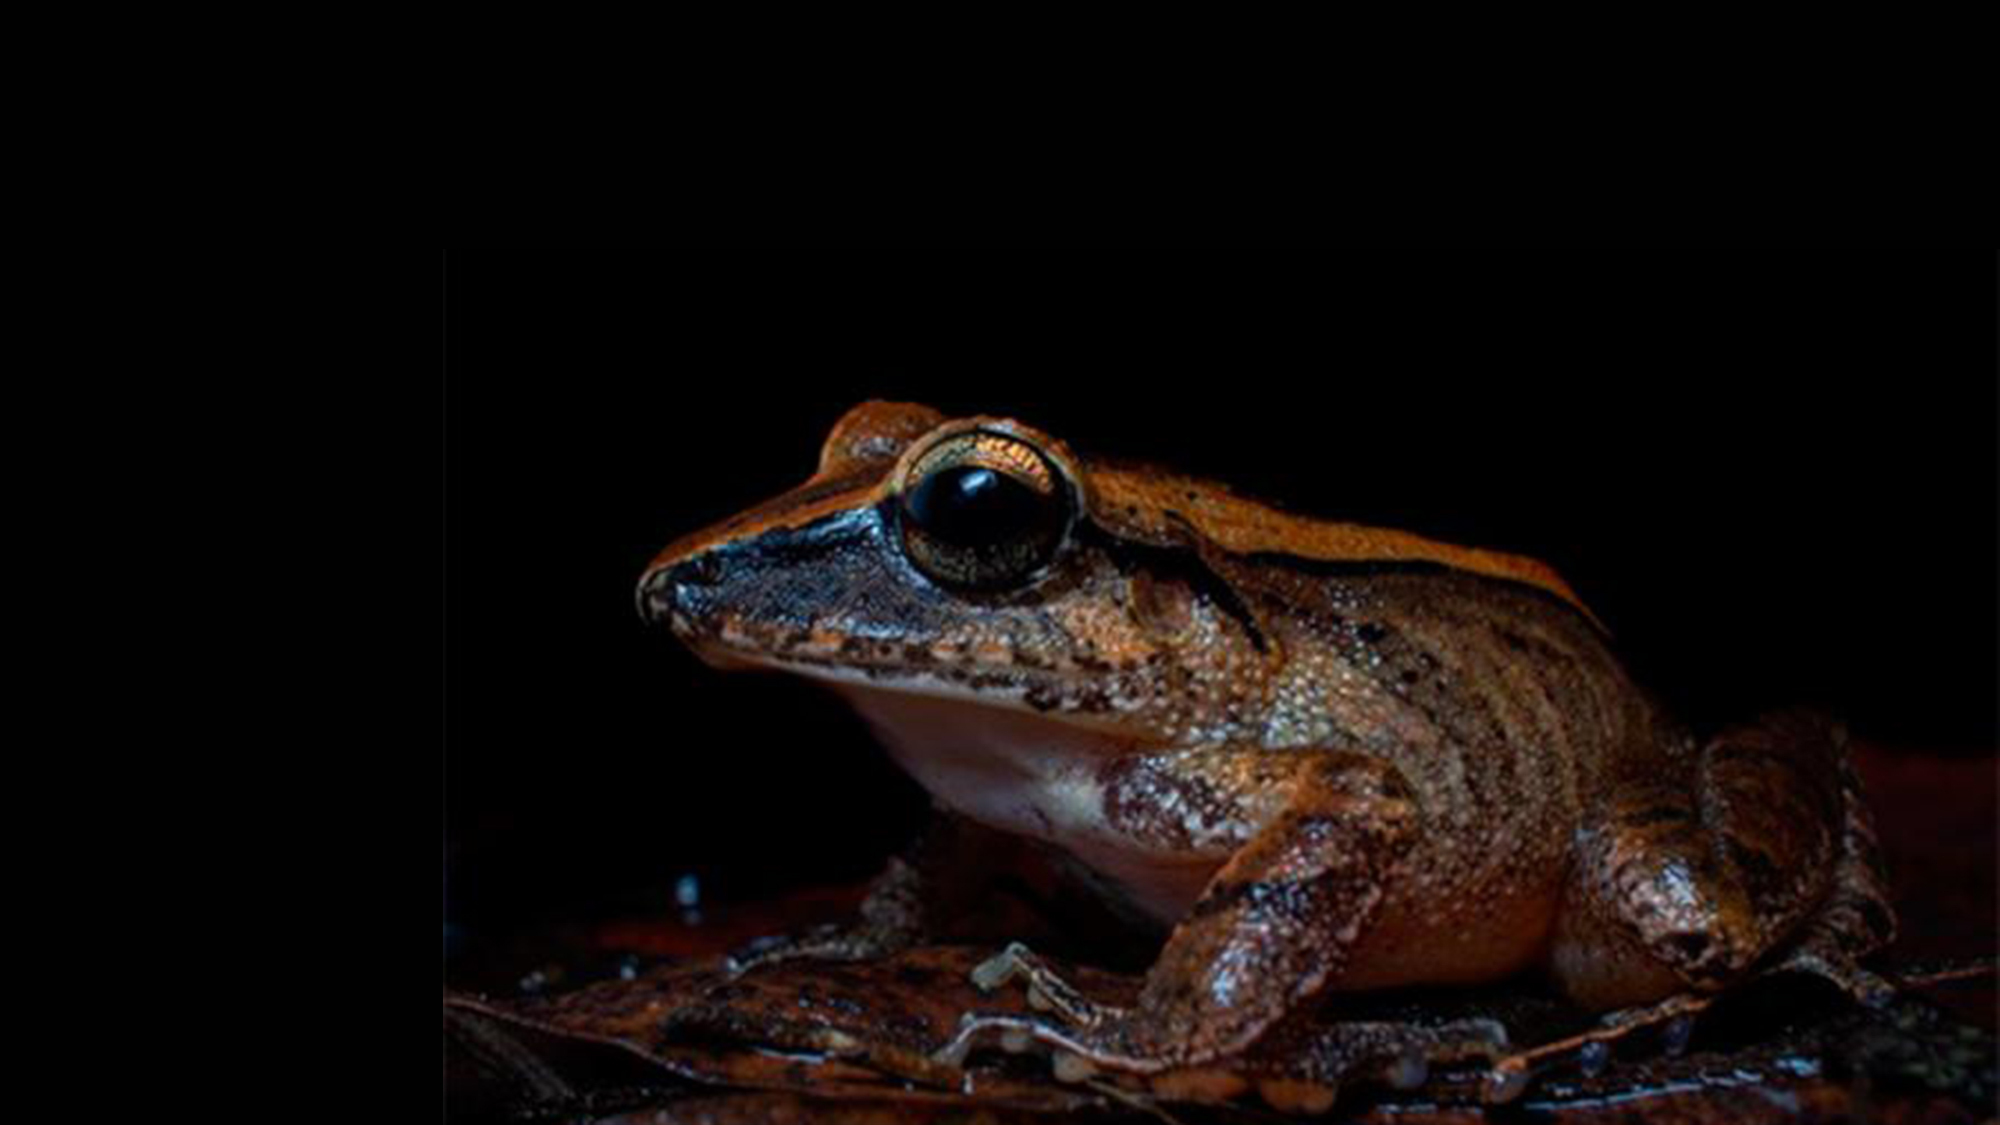 a close up of a brown-colored frog called Haddadus binotatus